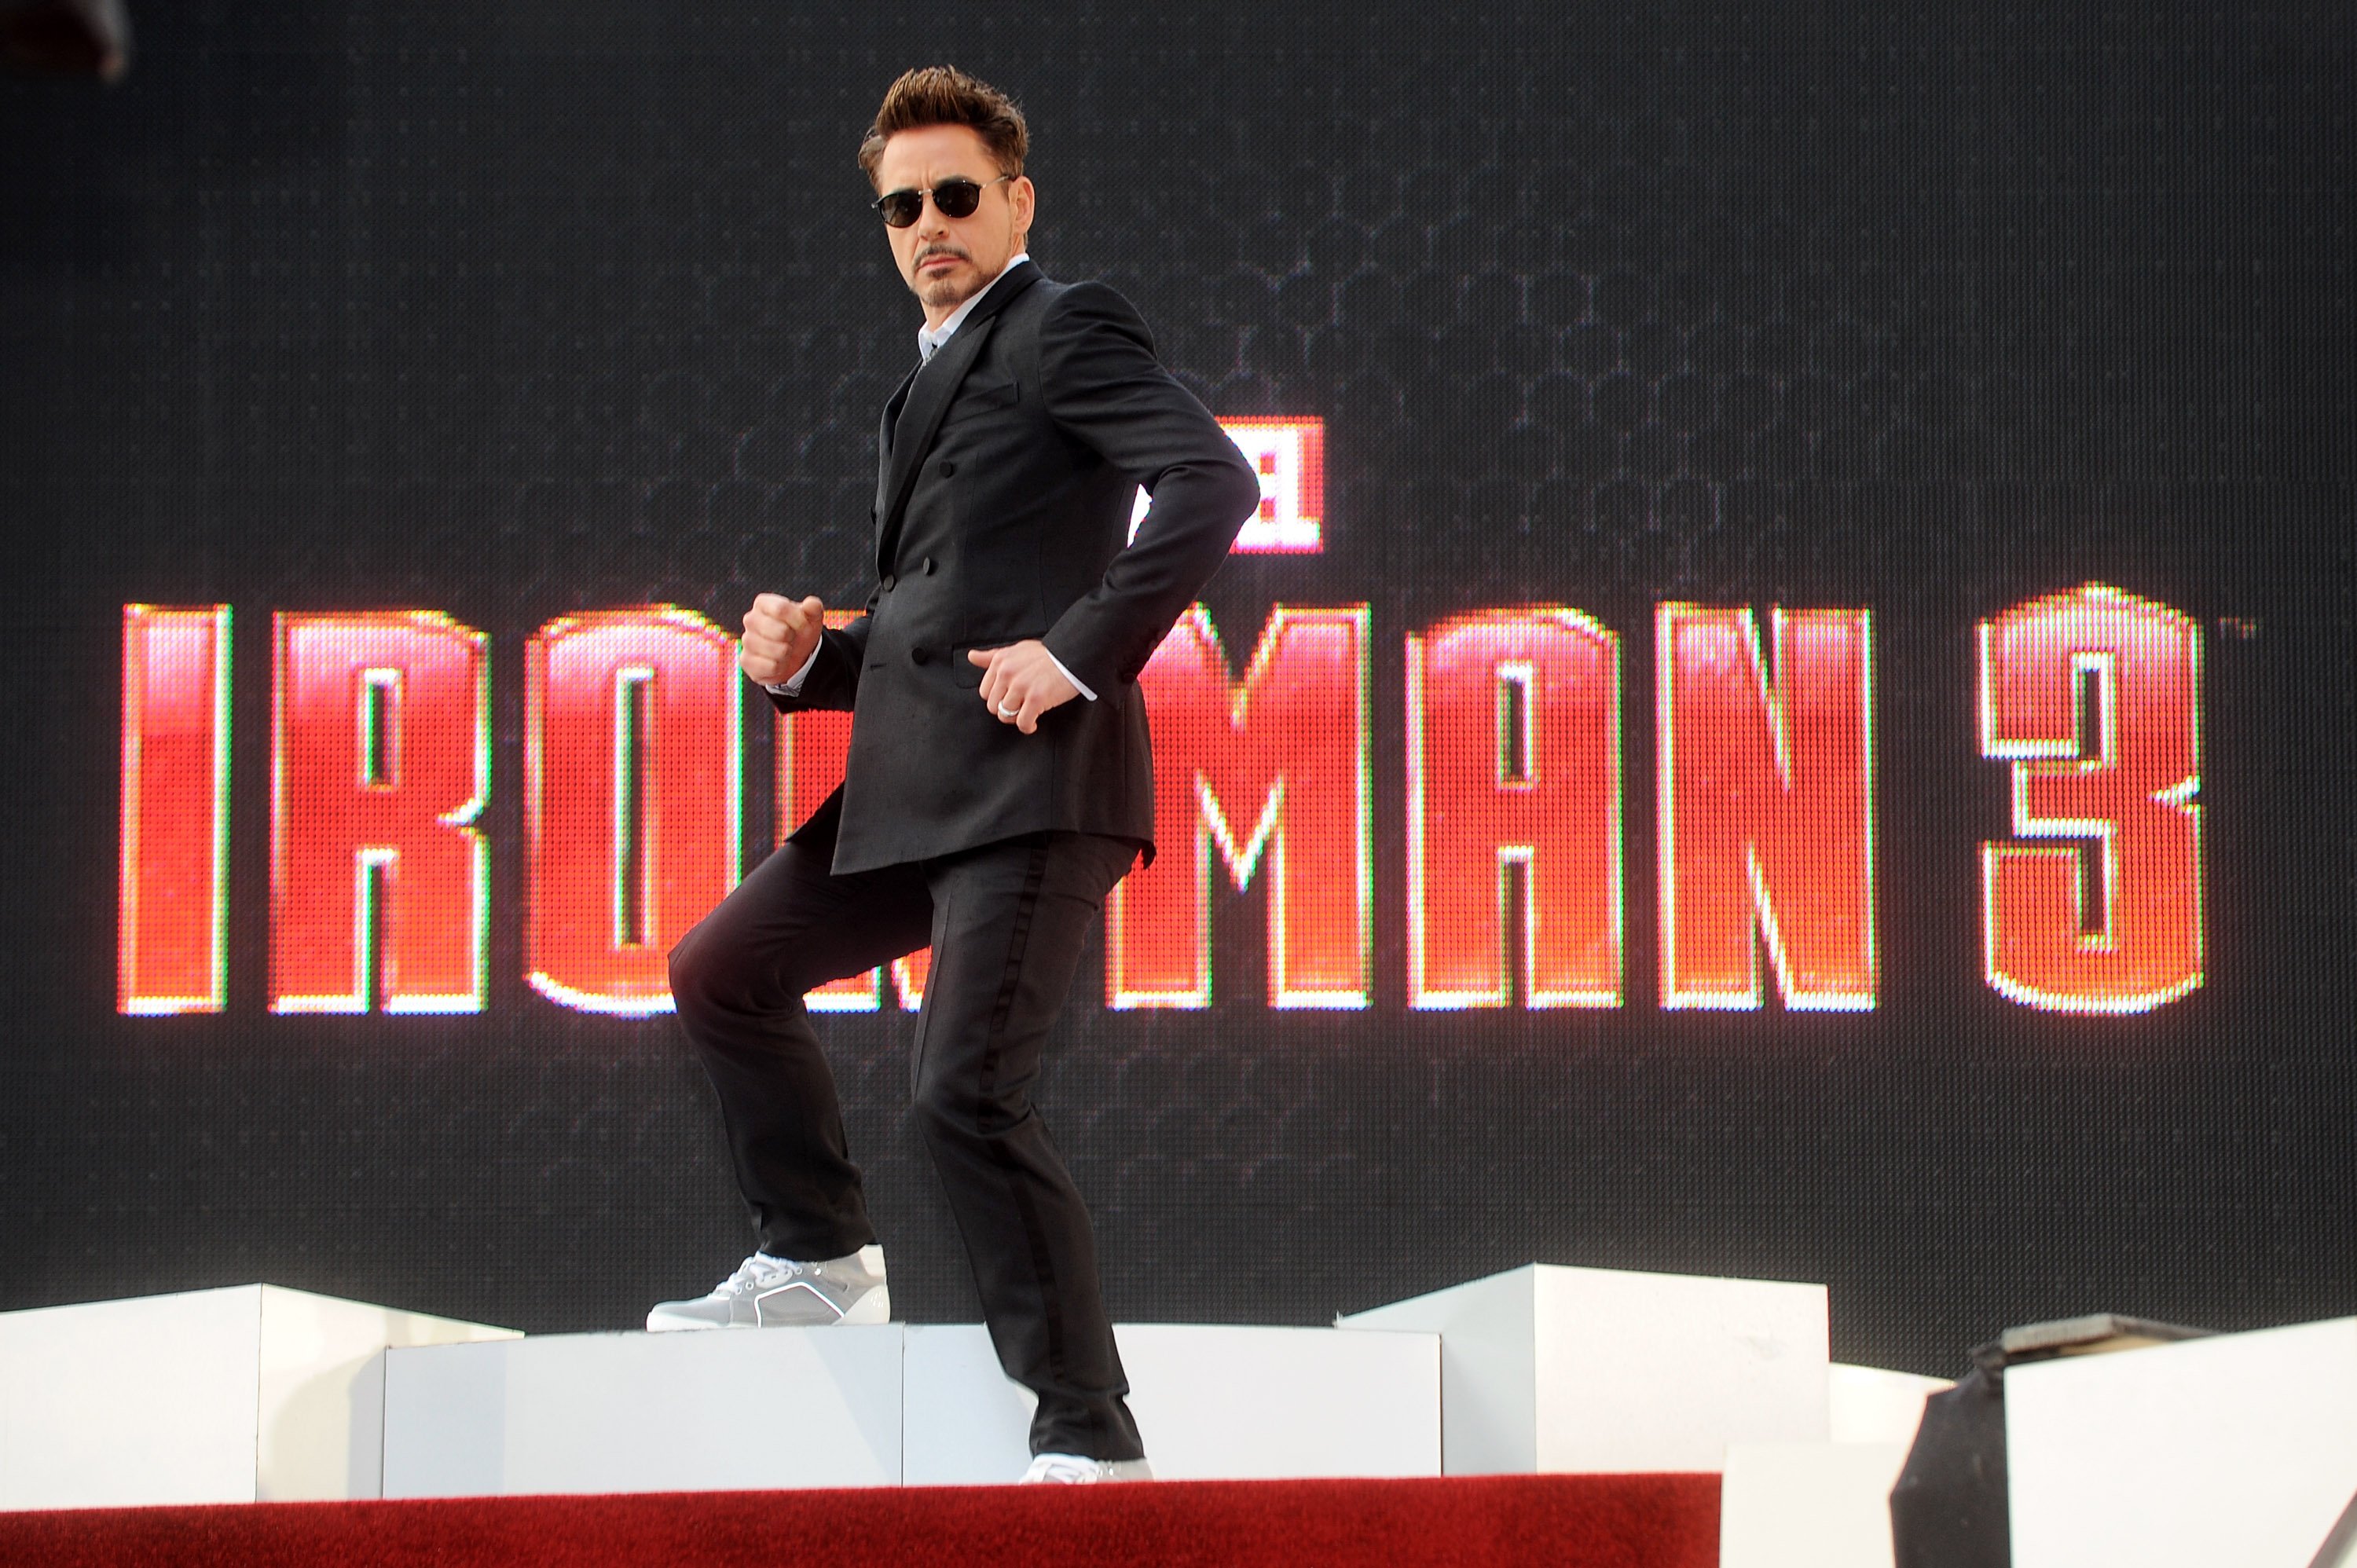 Robert Downey Jr attends a special screening of 'Iron Man 3' on April 18, 2013 in London, England.